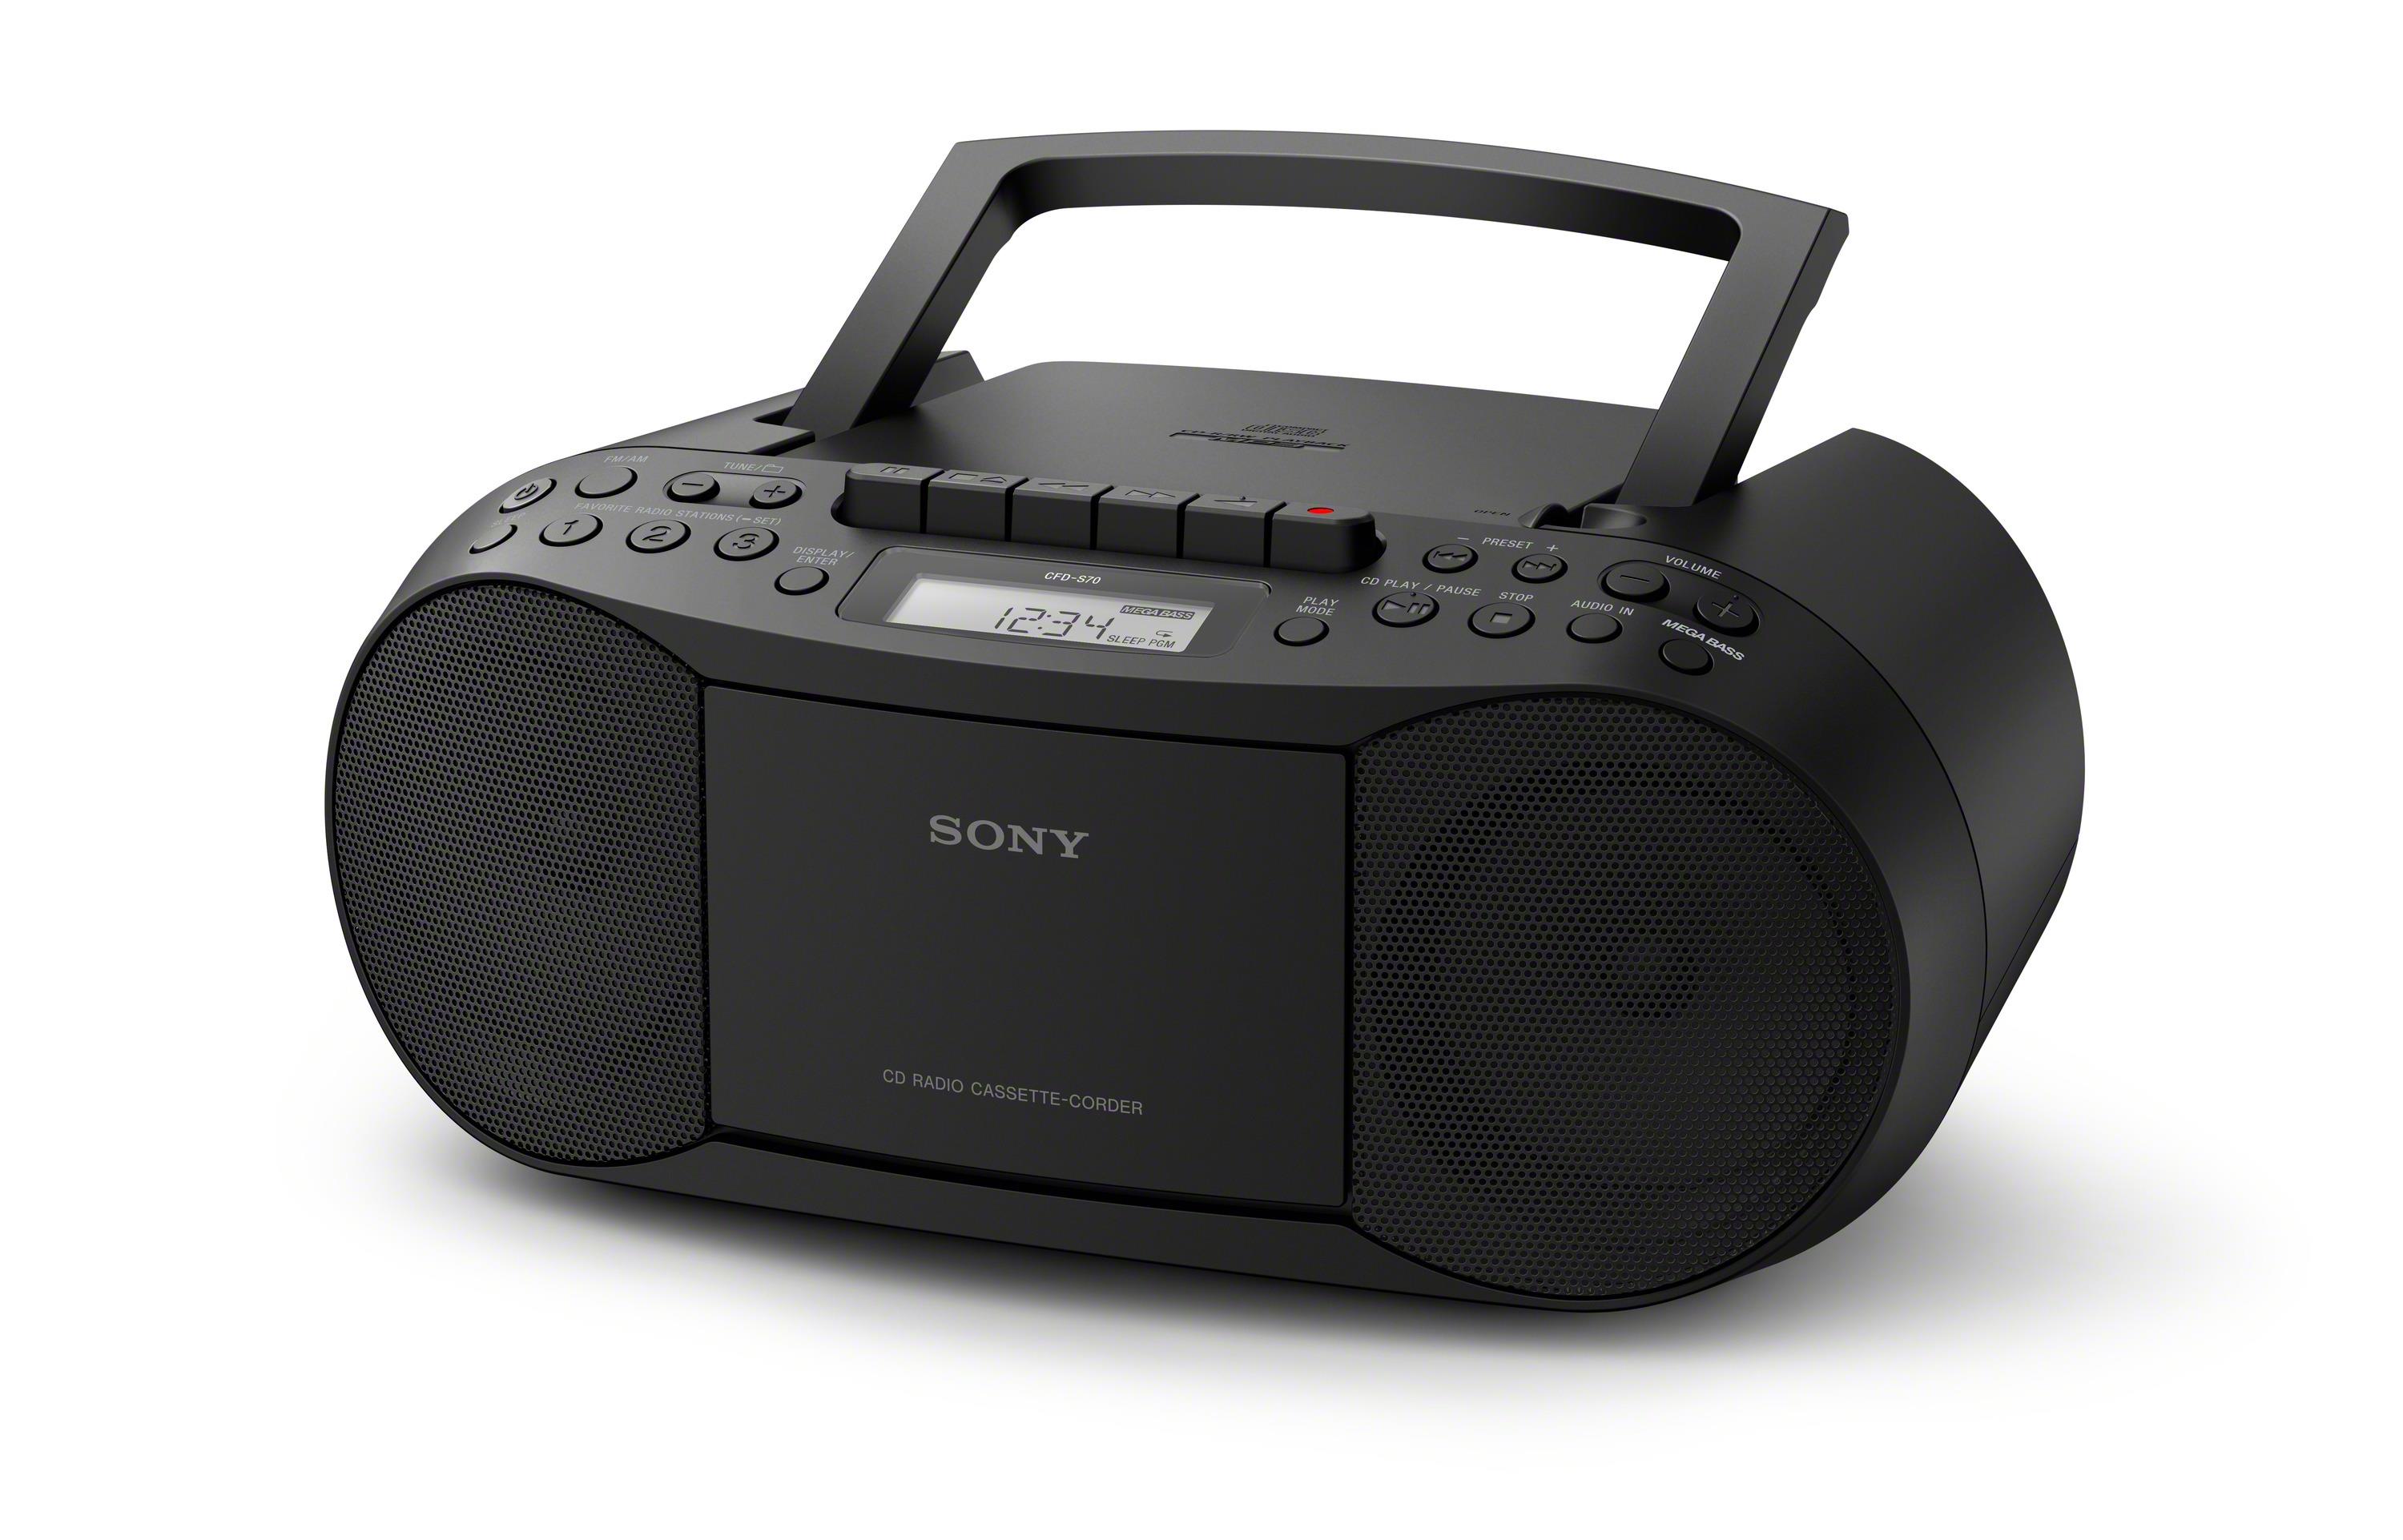 Sony Black CD Player Boombox with AM/FM Radio, Cassette Player